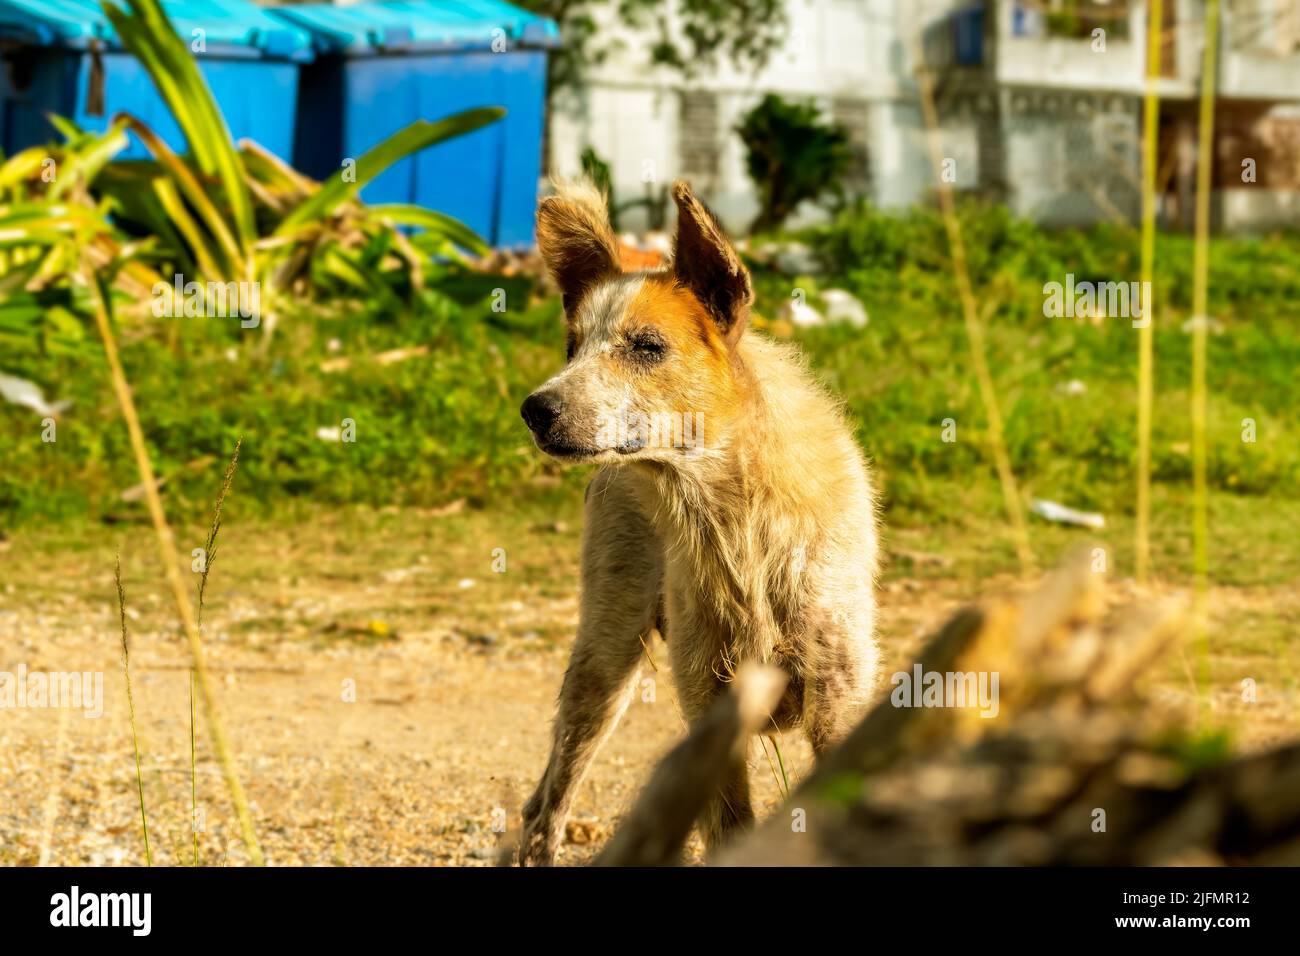 Close up photo of an adult stray dog of light colors, he has mange and his eyes are also showing signs of sickness Stock Photo